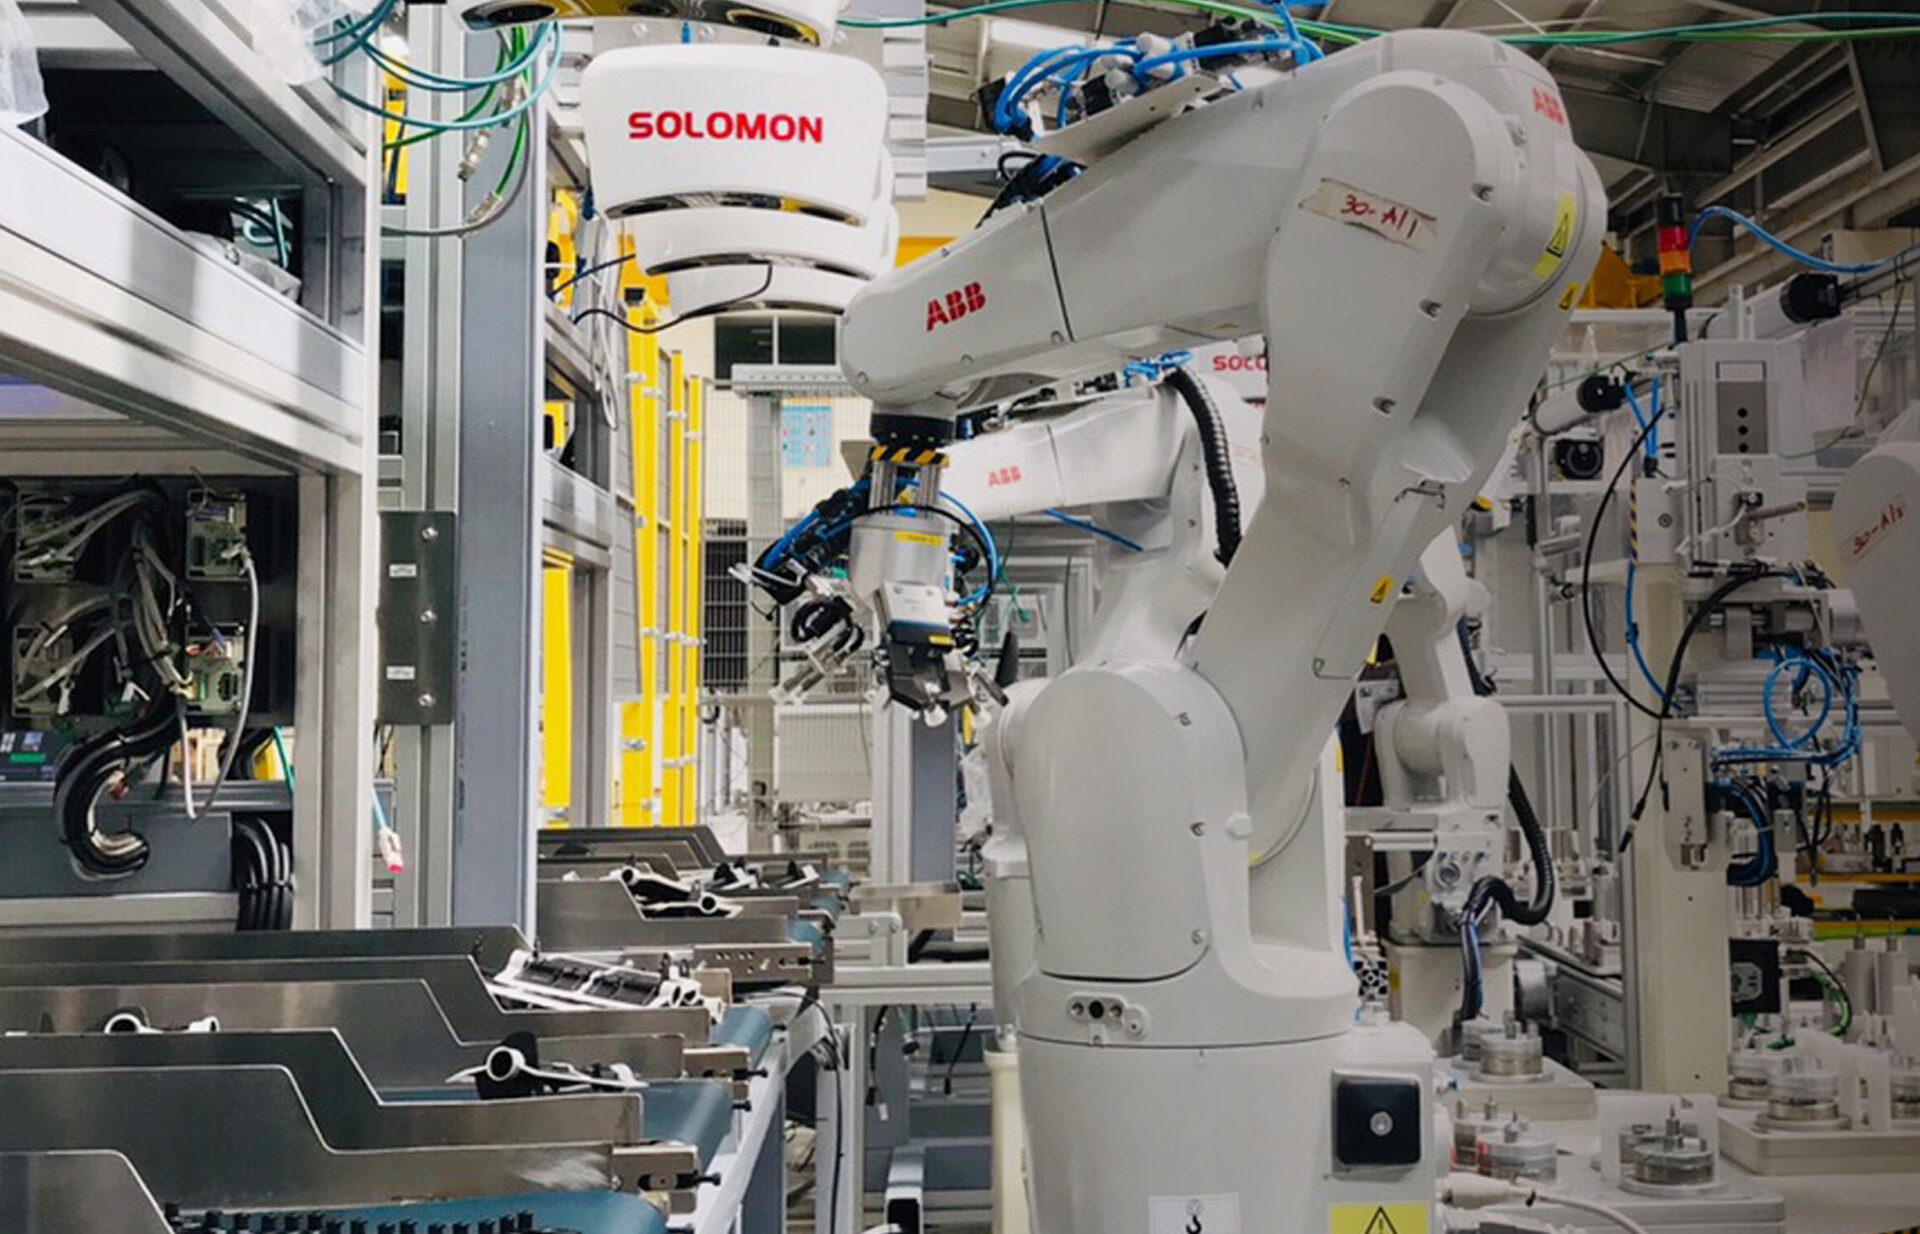 an ABB robot on an assembly line arm conducts a kitting task